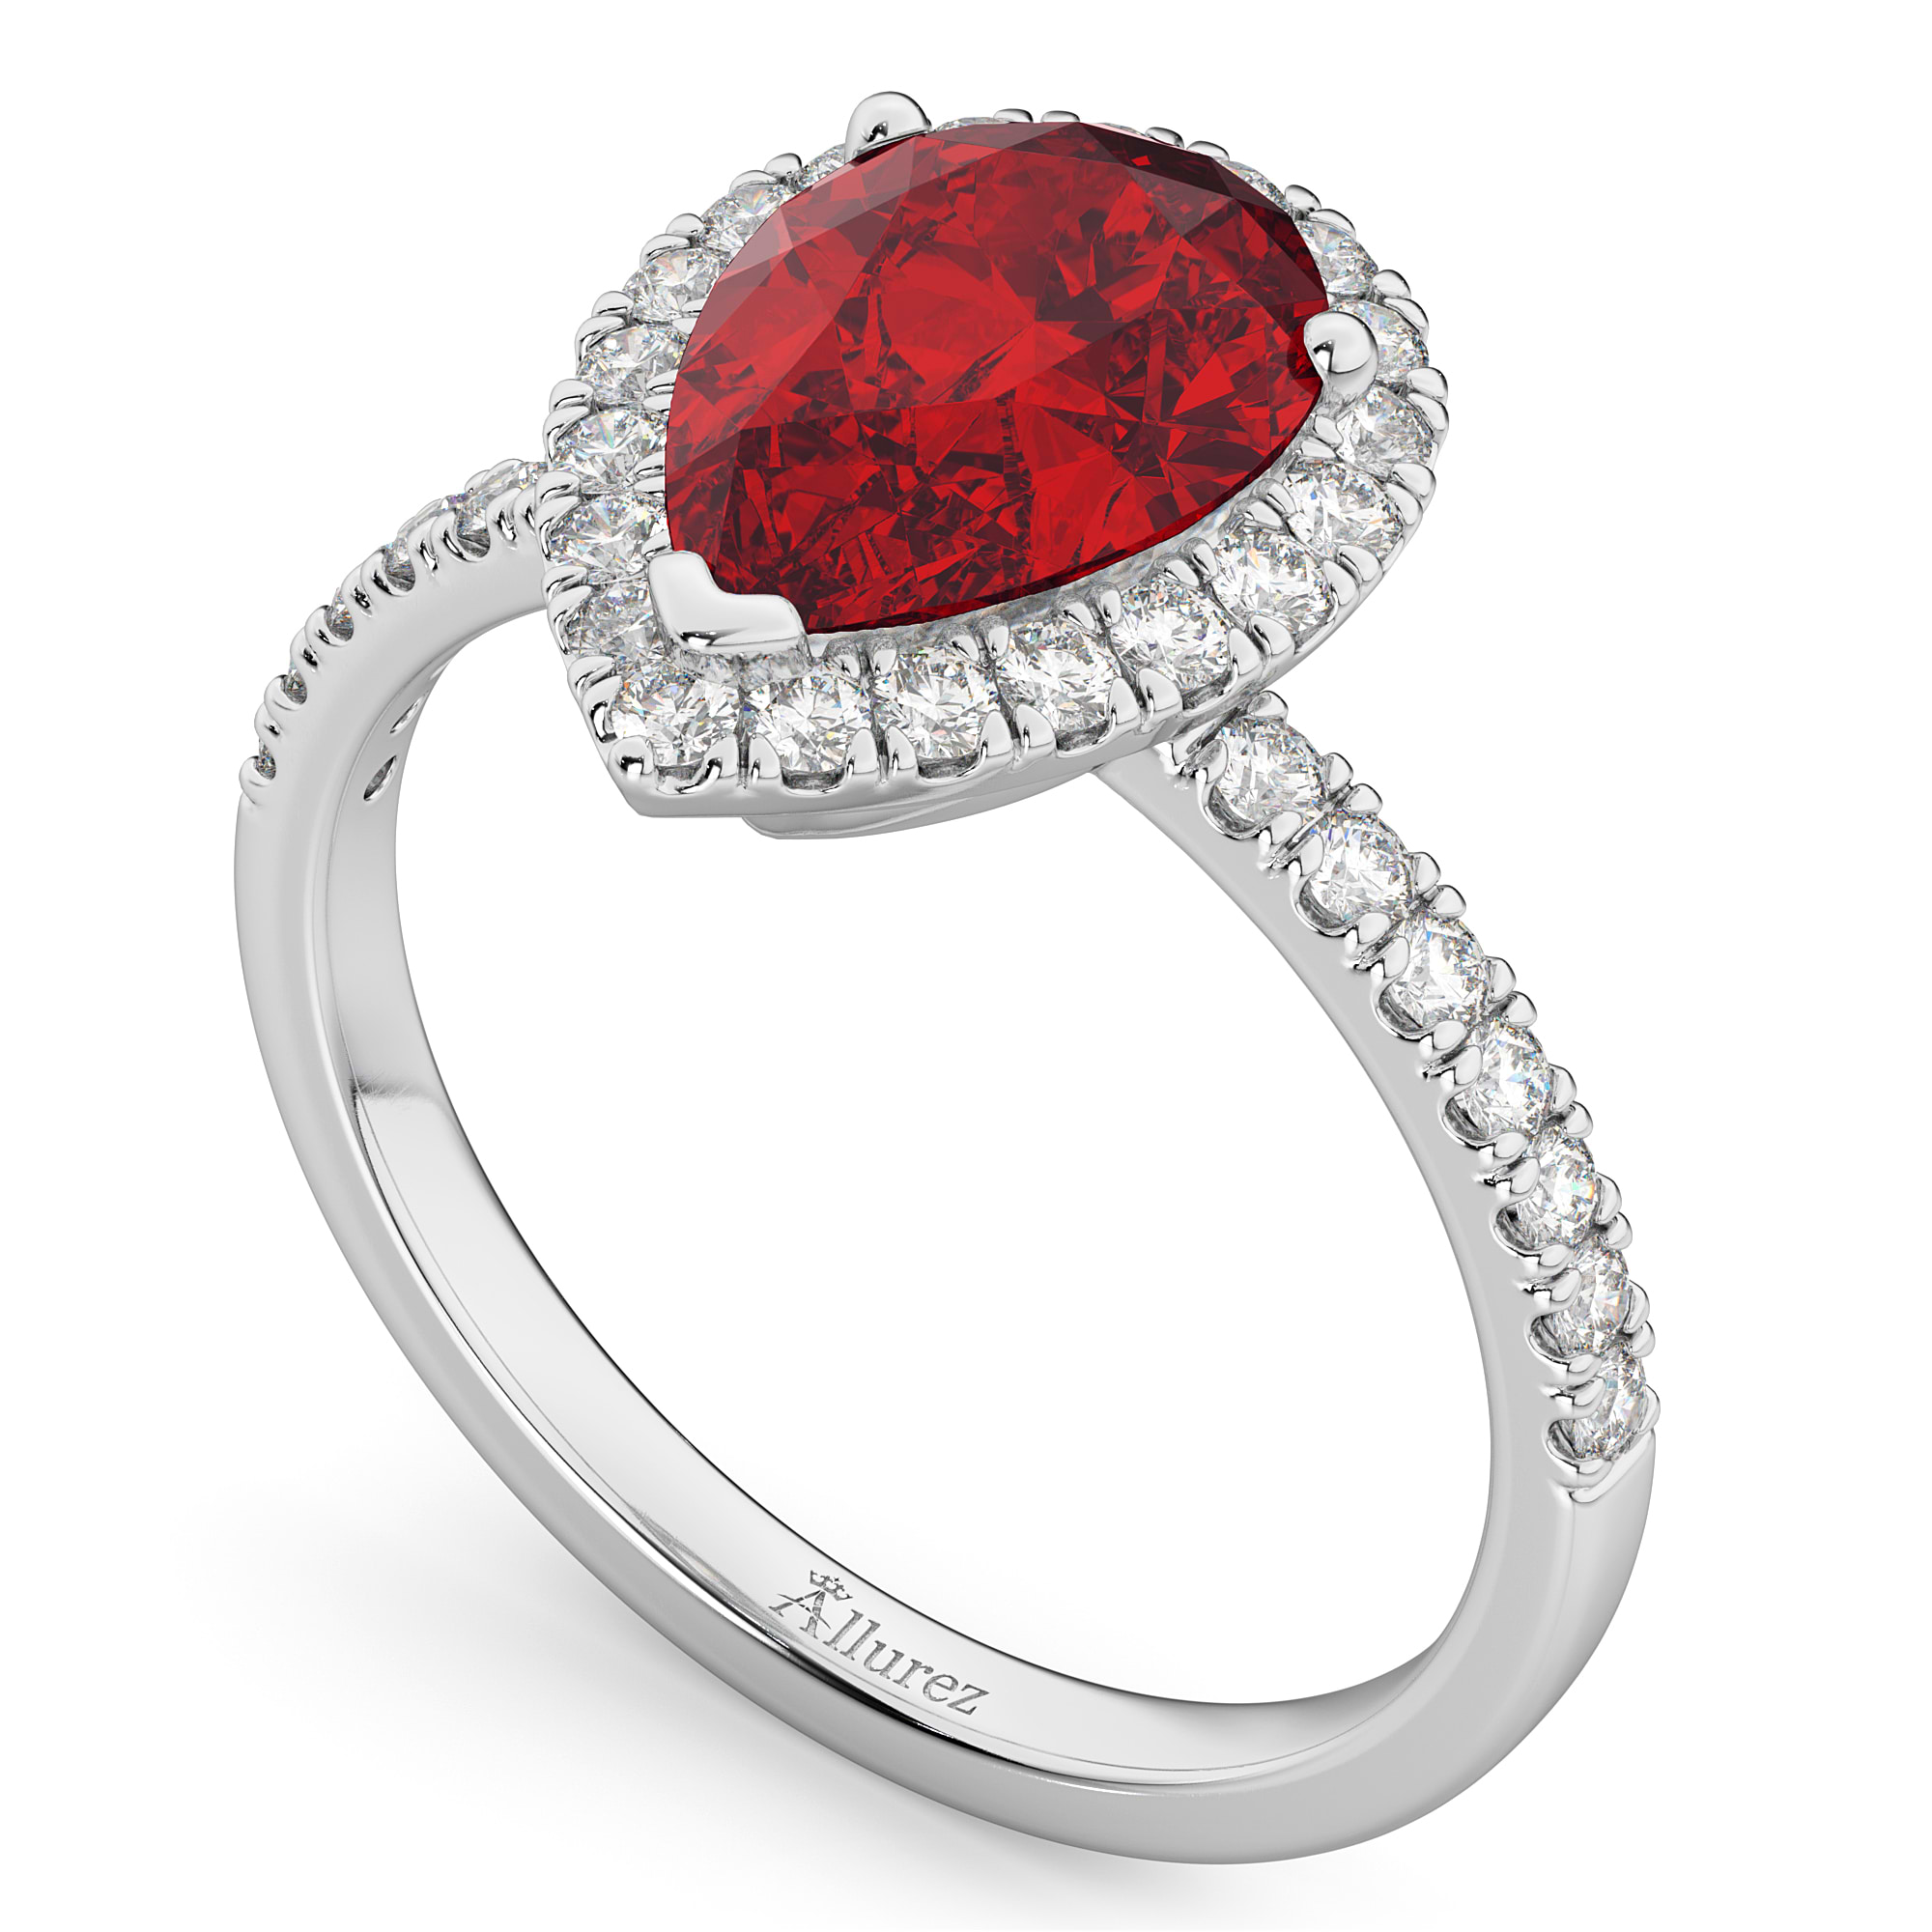 Pear Cut Halo Ruby & Diamond Engagement Ring 14K White Gold 3.01ct